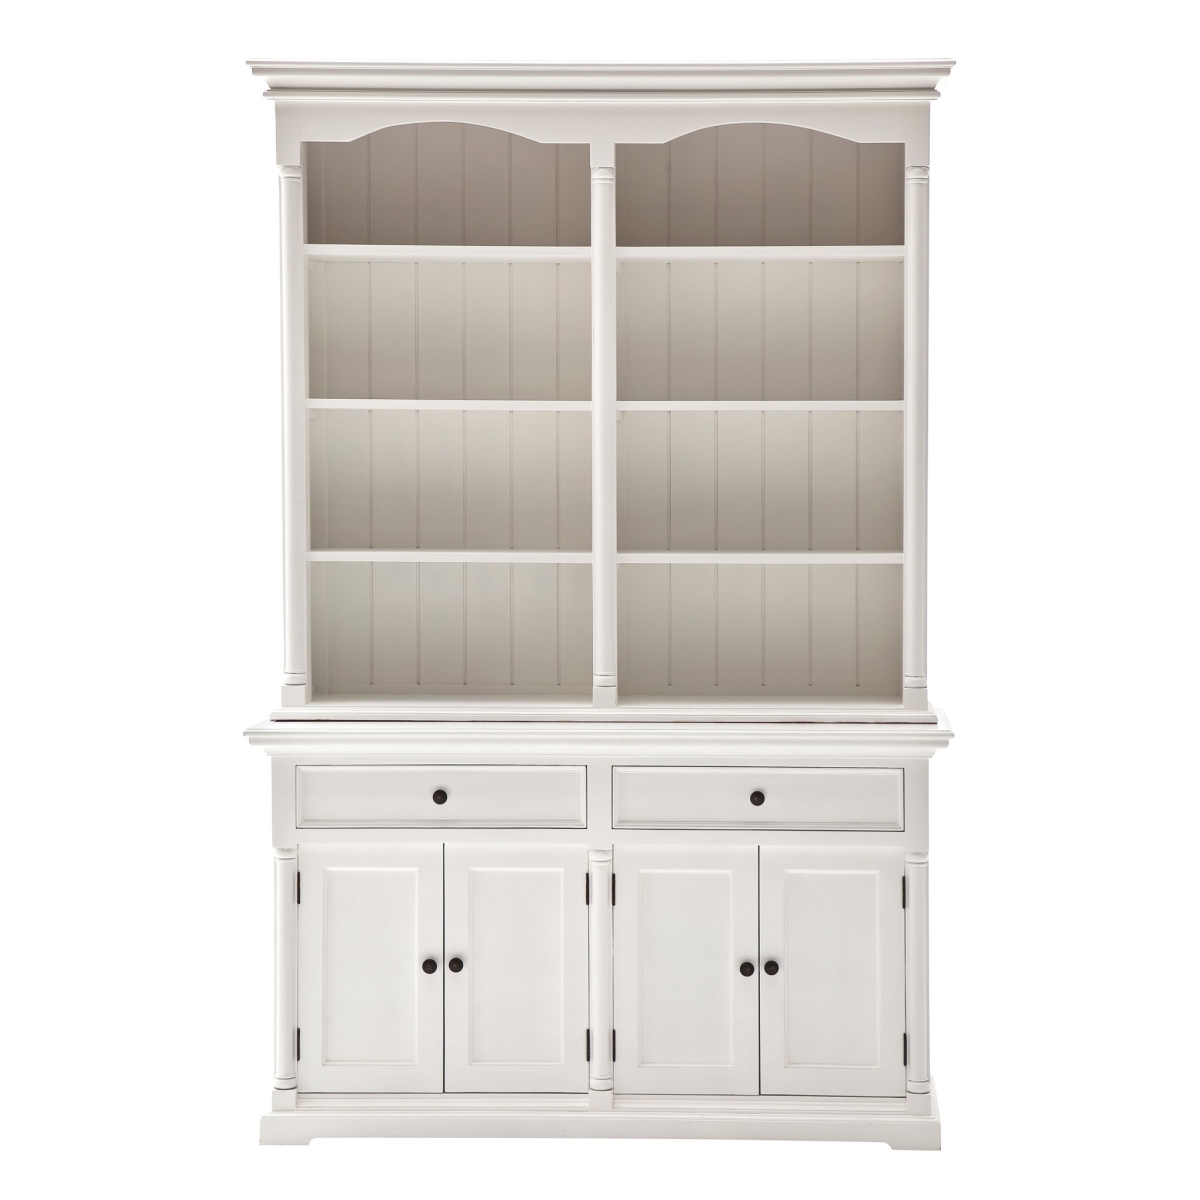 Picture of HomeRoots 397129 86.61 x 57.09 x 19.69 in. Classic White Hutch Cabinet